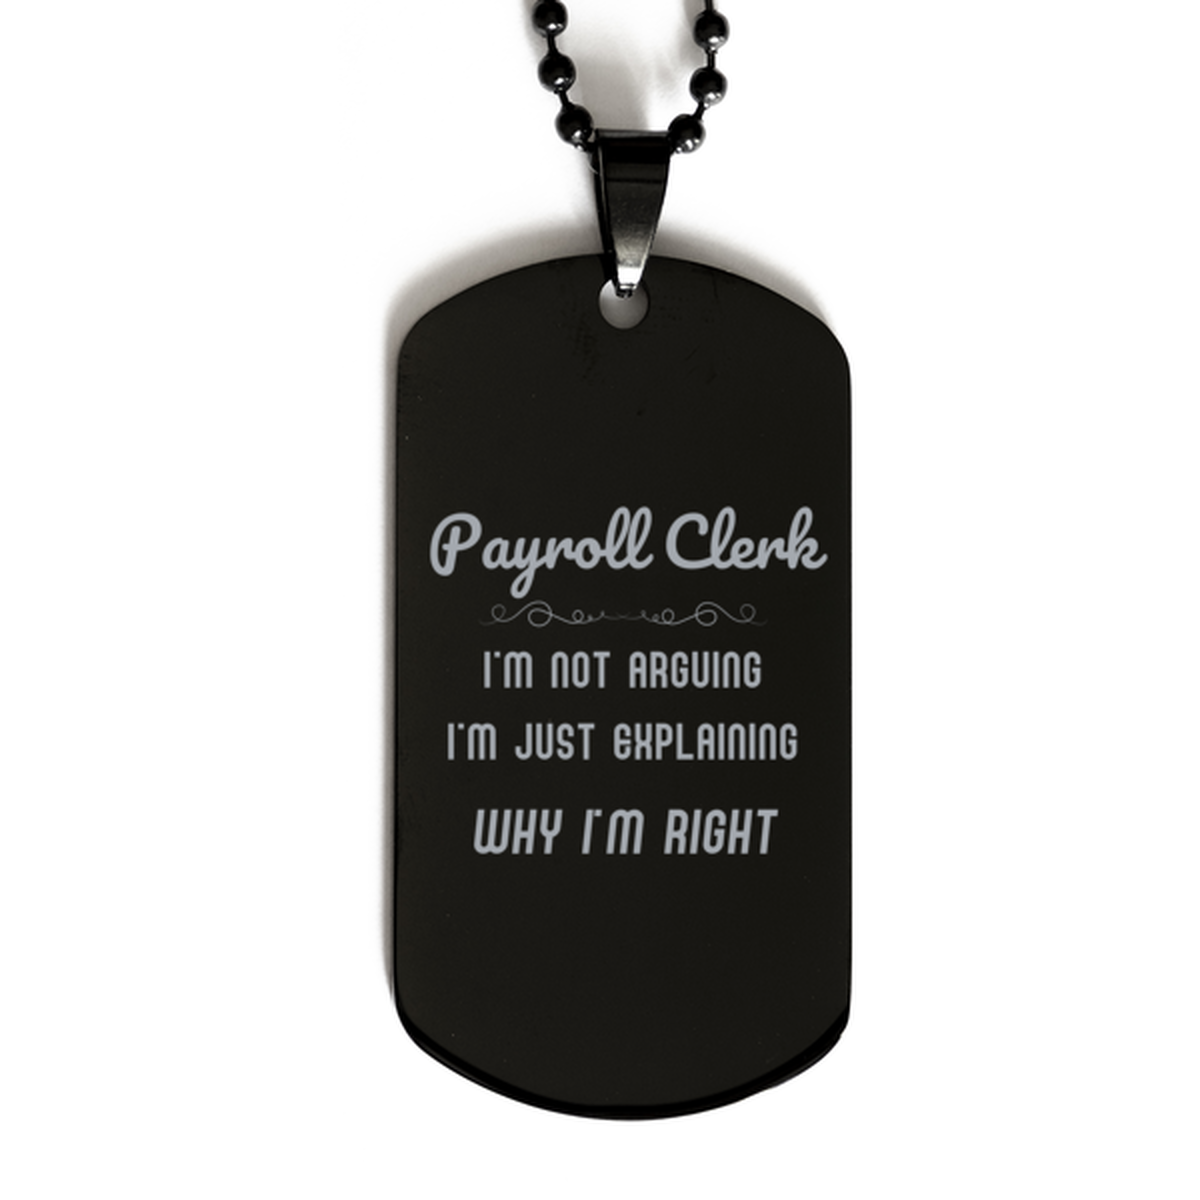 Payroll Clerk I'm not Arguing. I'm Just Explaining Why I'm RIGHT Black Dog Tag, Funny Saying Quote Payroll Clerk Gifts For Payroll Clerk Graduation Birthday Christmas Gifts for Men Women Coworker